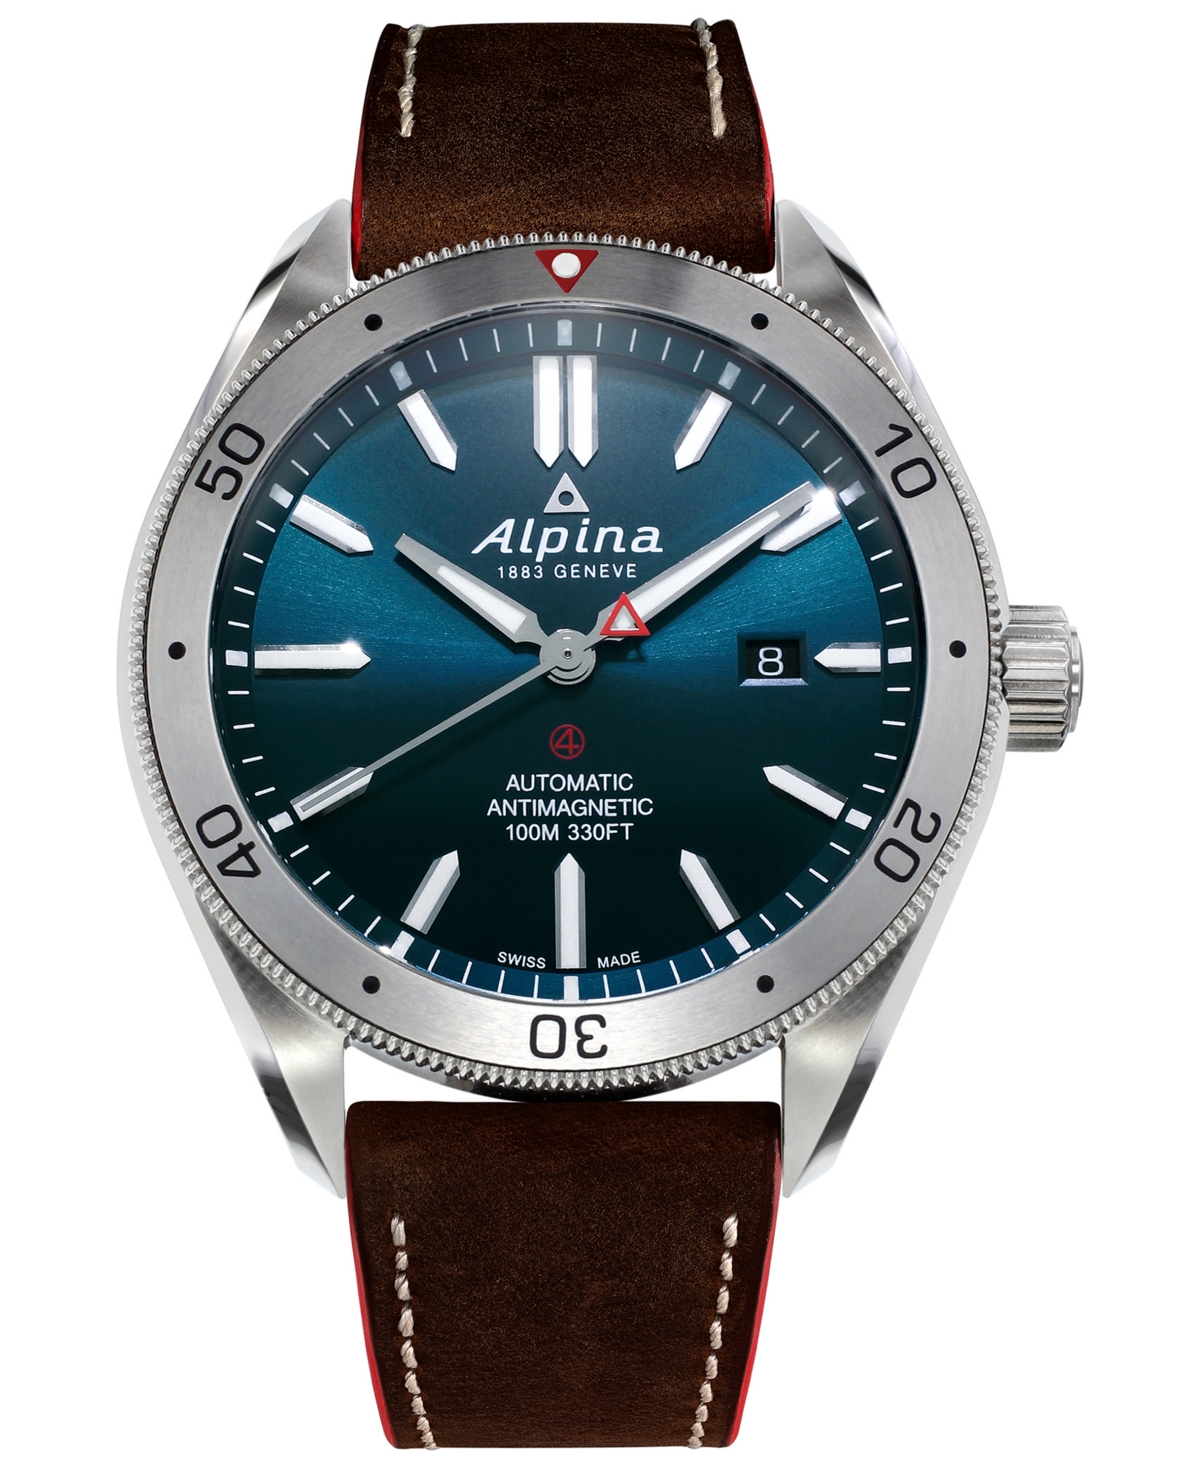 ALPINA MEN'S SWISS AUTOMATIC ALPINER 4 BROWN LEATHER STRAP WATCH 44MM